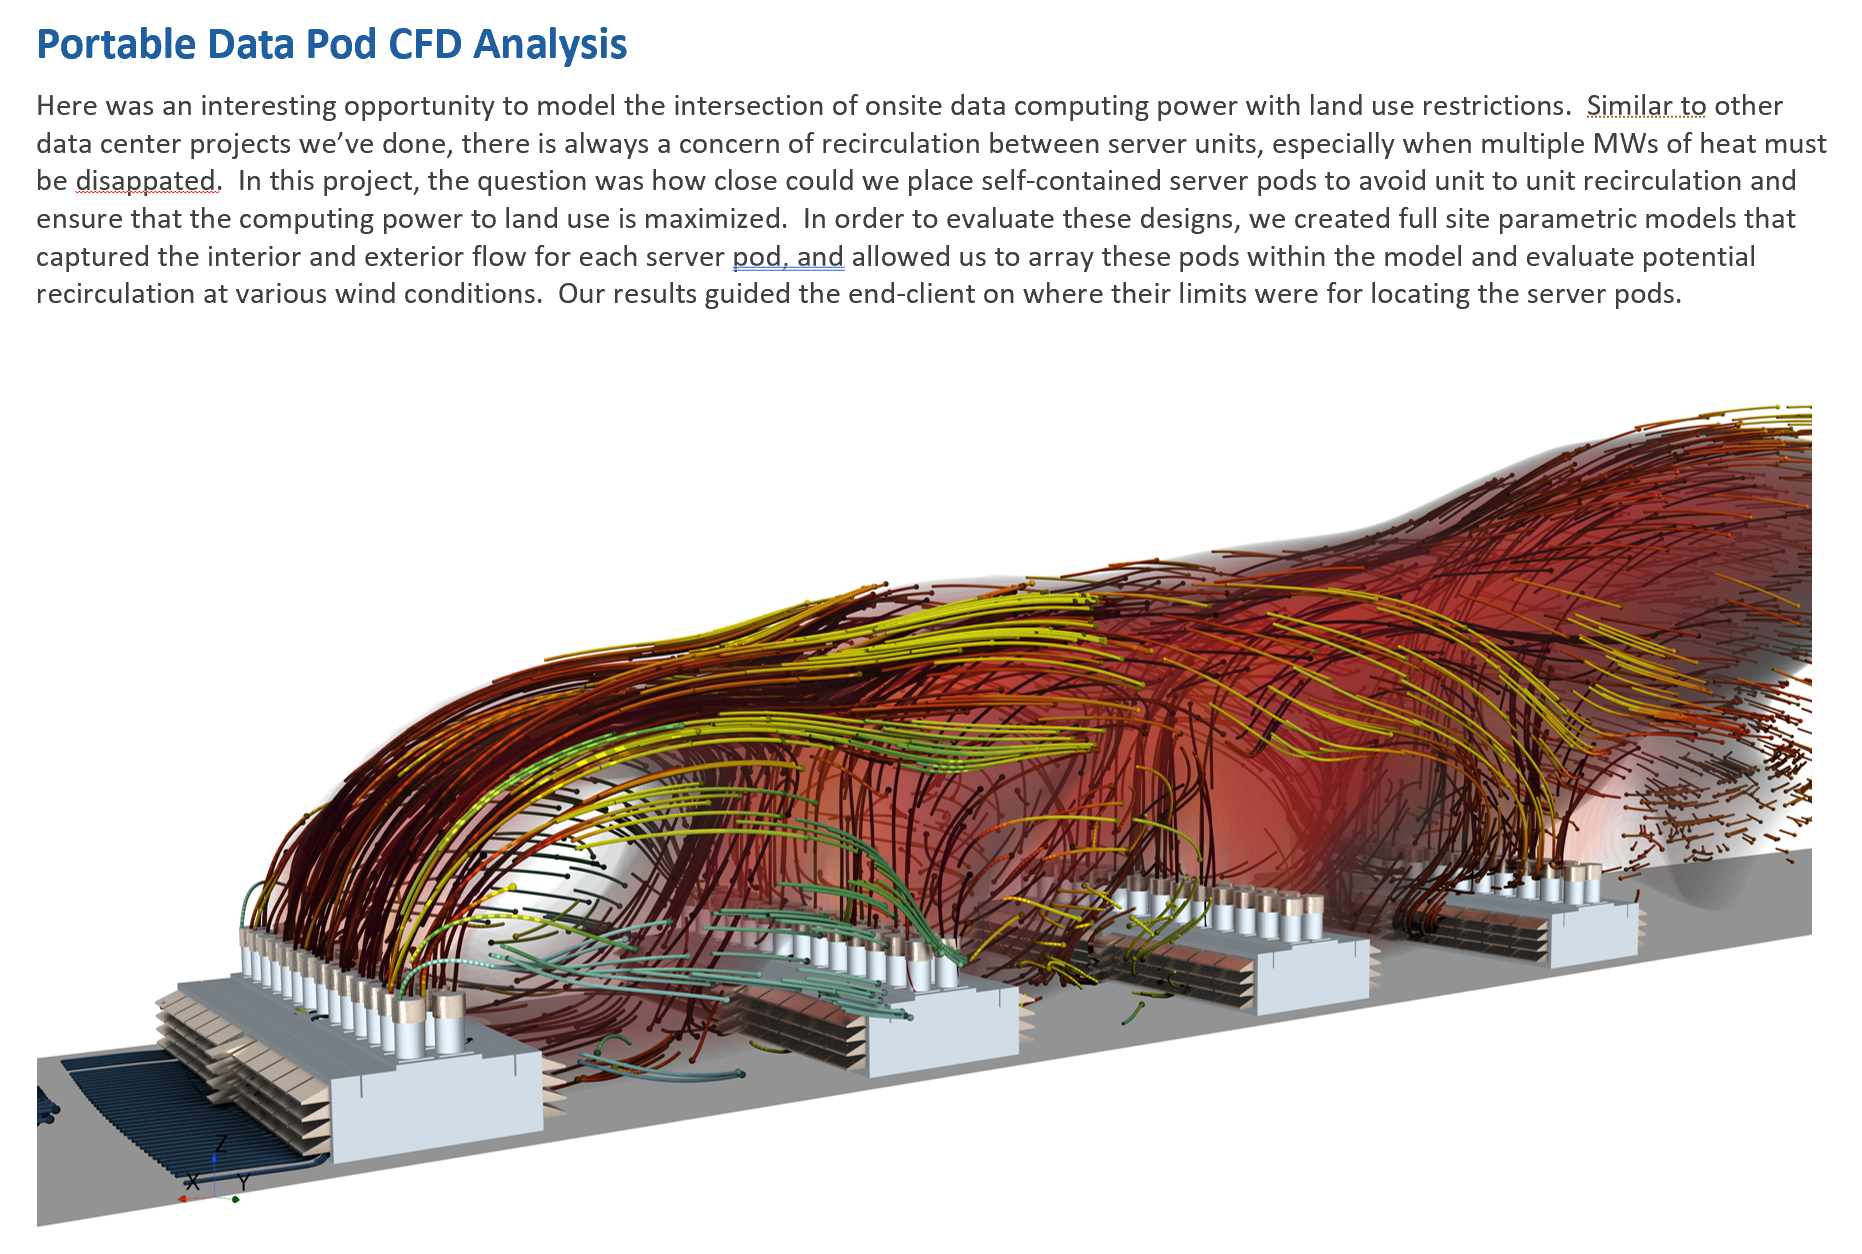 CFD Engineering Services - Portable Data Pod CFD Analysis